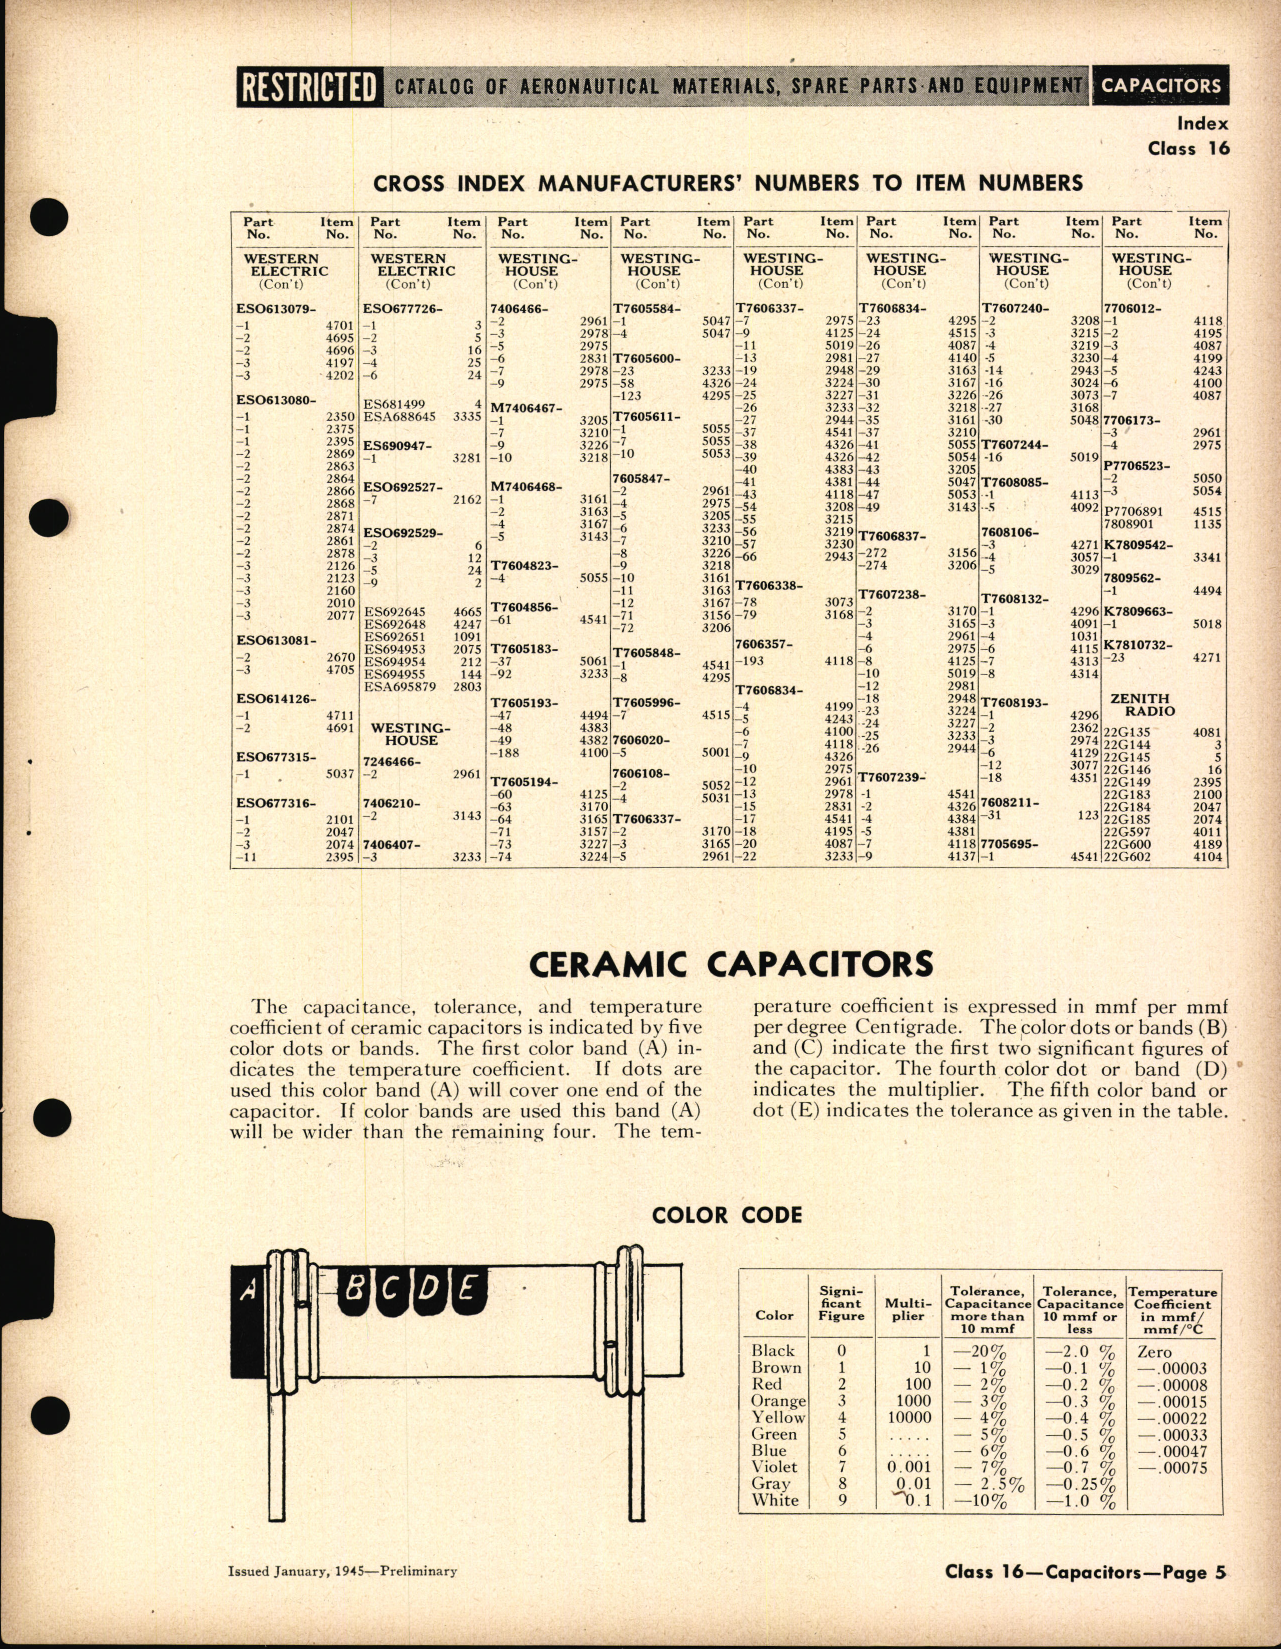 Sample page 5 from AirCorps Library document: Capacitors